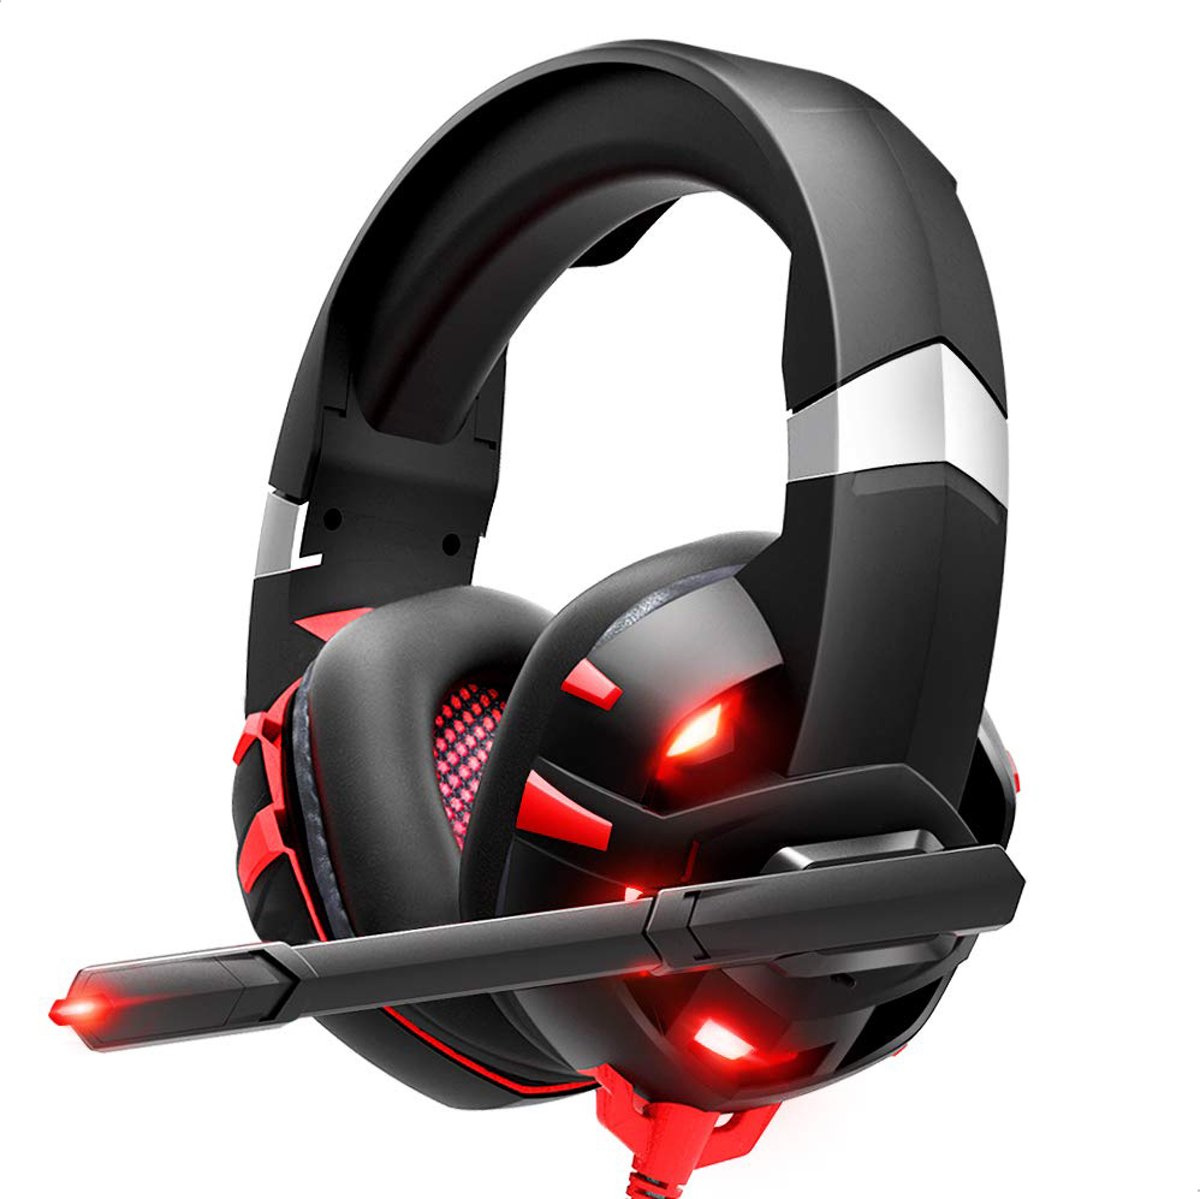 Gaming Headset Rood | Koptelefoon |7.1 Surround Sound | Microfoon | Noise Canceling | PC, PS4, Xbox One